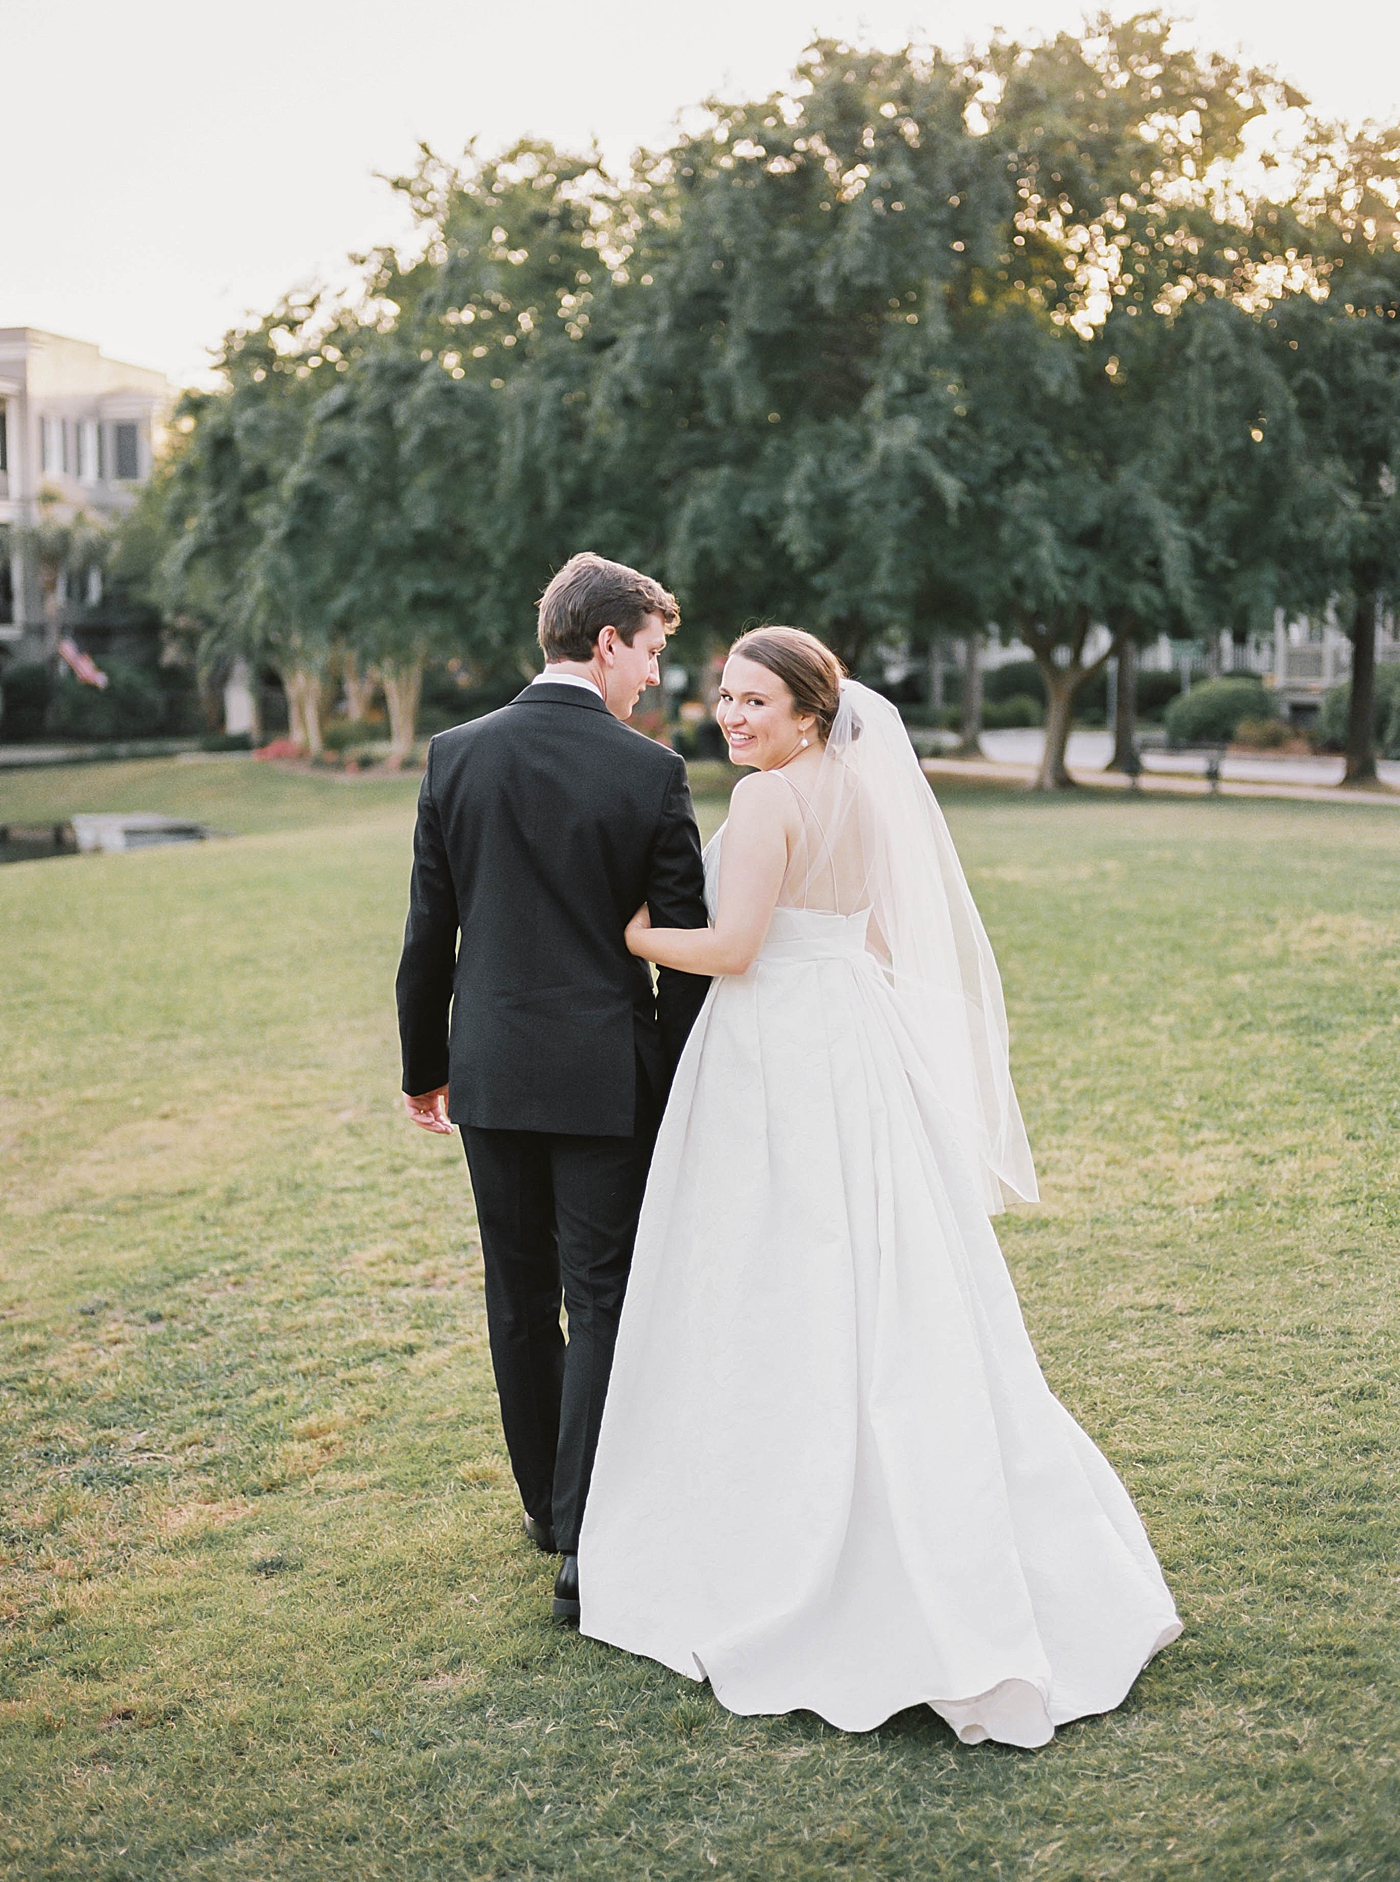 Bride looking over her shoulder walking with groom during their Intimate spring wedding | Carters Event Co